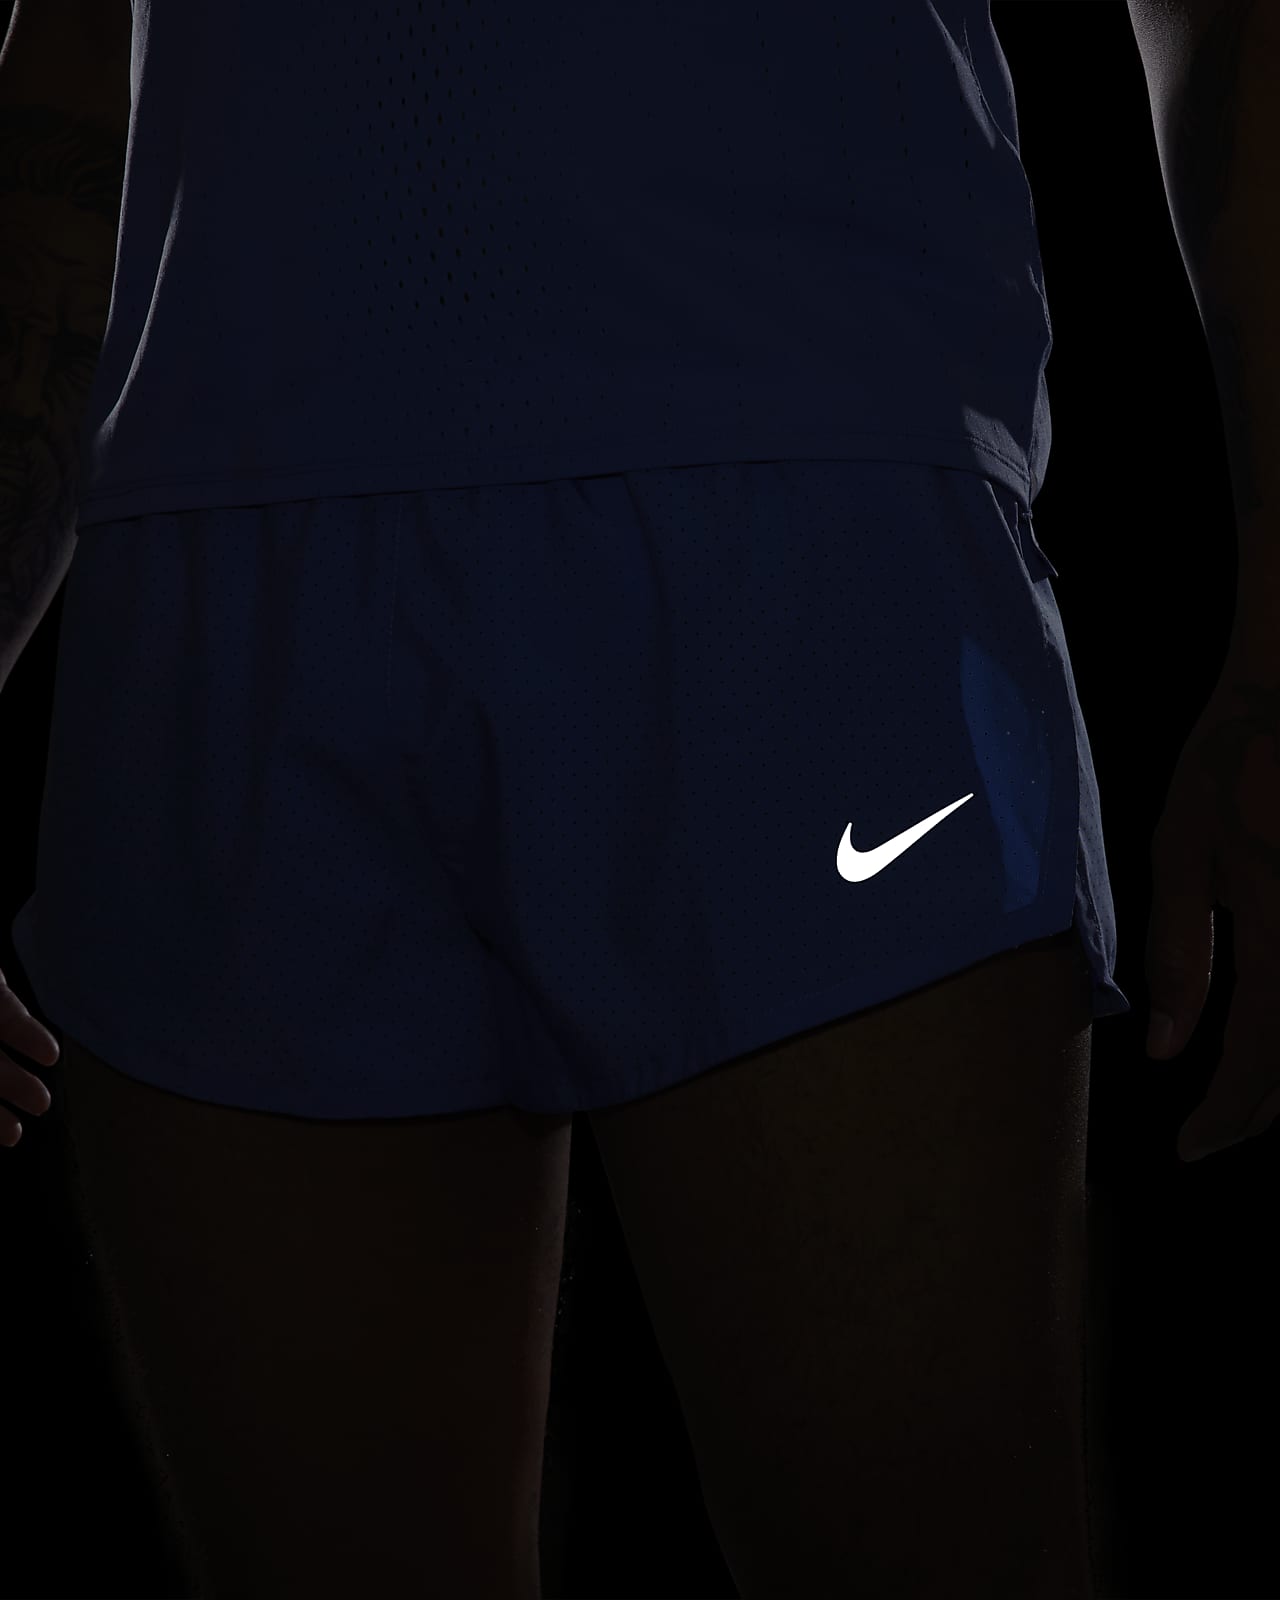 Nike Dri-FIT Fast Men's 2" Brief-Lined Shorts.